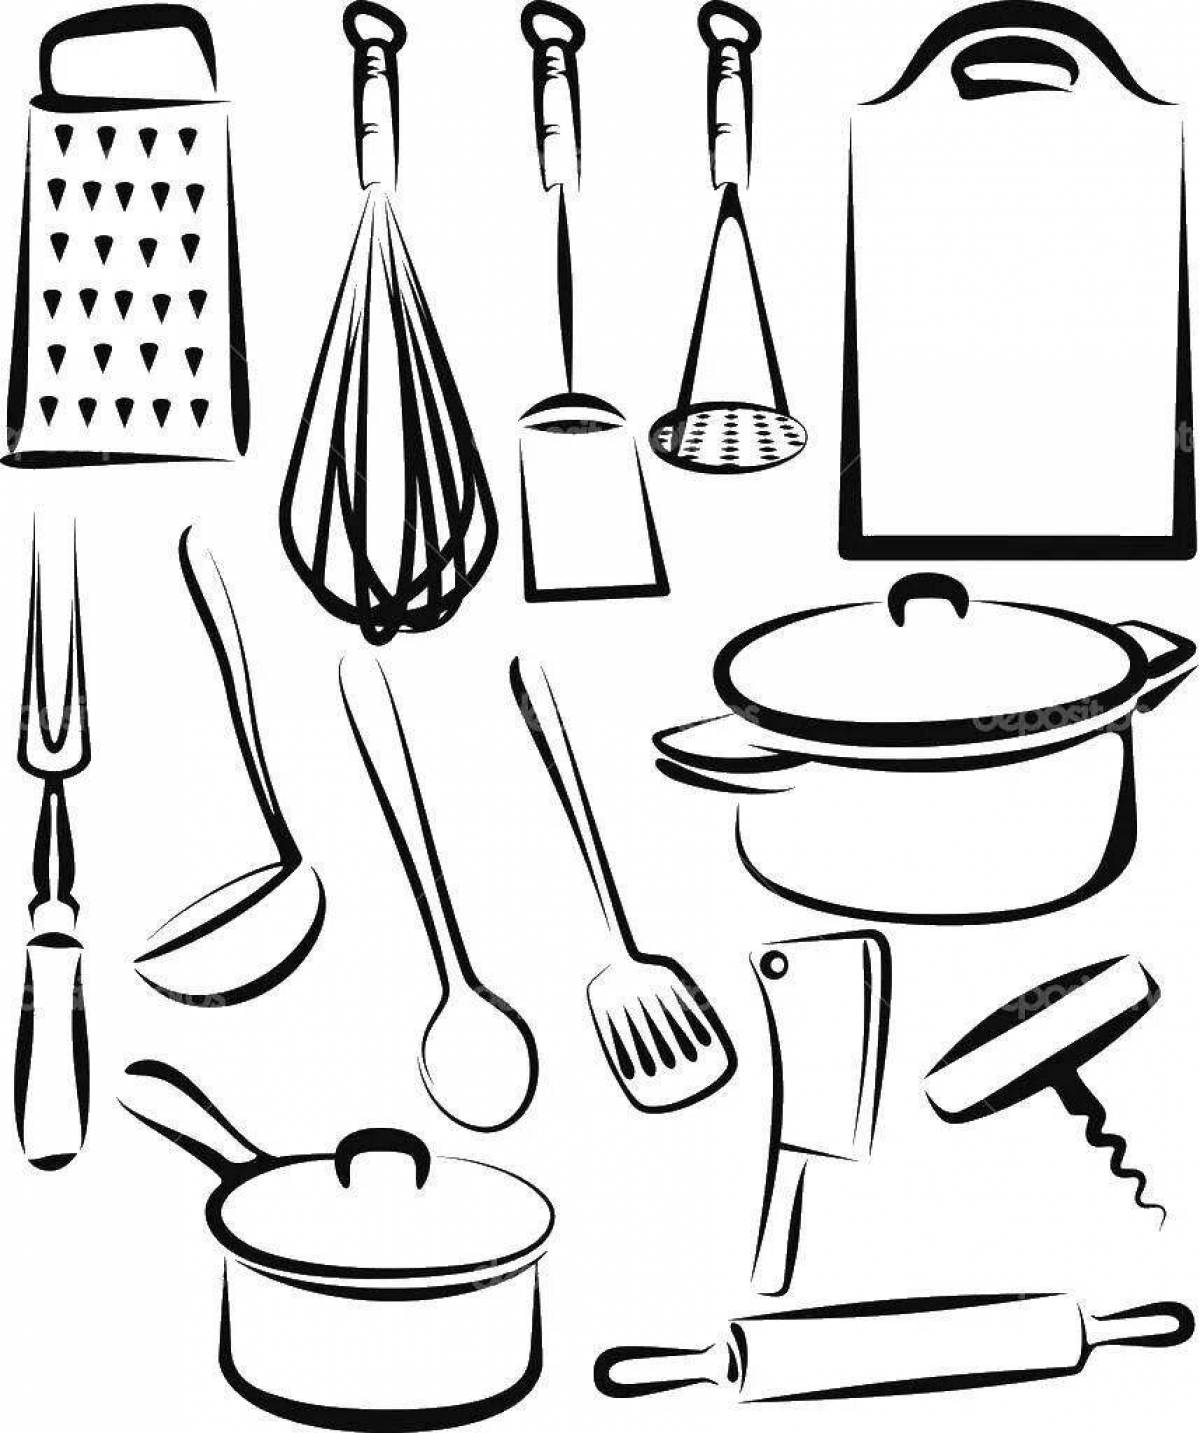 Coloring book exquisite cook tools